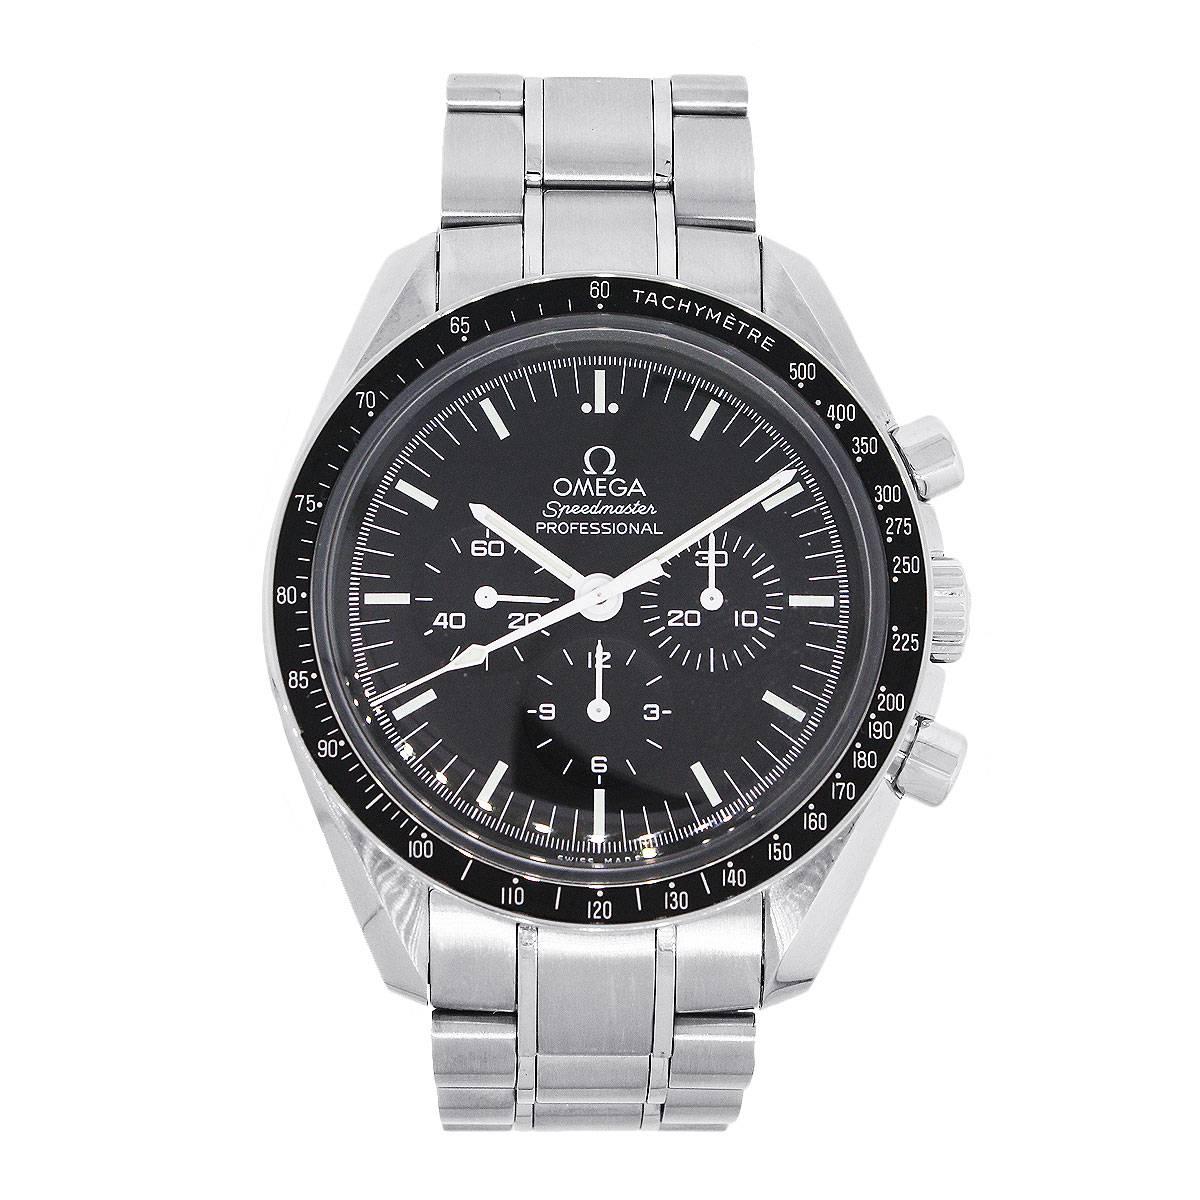 Brand: Omega
Model: Speedmaster
Case Material: Stainless Steel
Case Diameter: 42mm
Crystal: Hesalite Crystal
Bezel: Black fixed tachymeter bezel
Dial: Black chronograph dial with luminescent dial markers and sub dials. Day is indicated at 12 o’